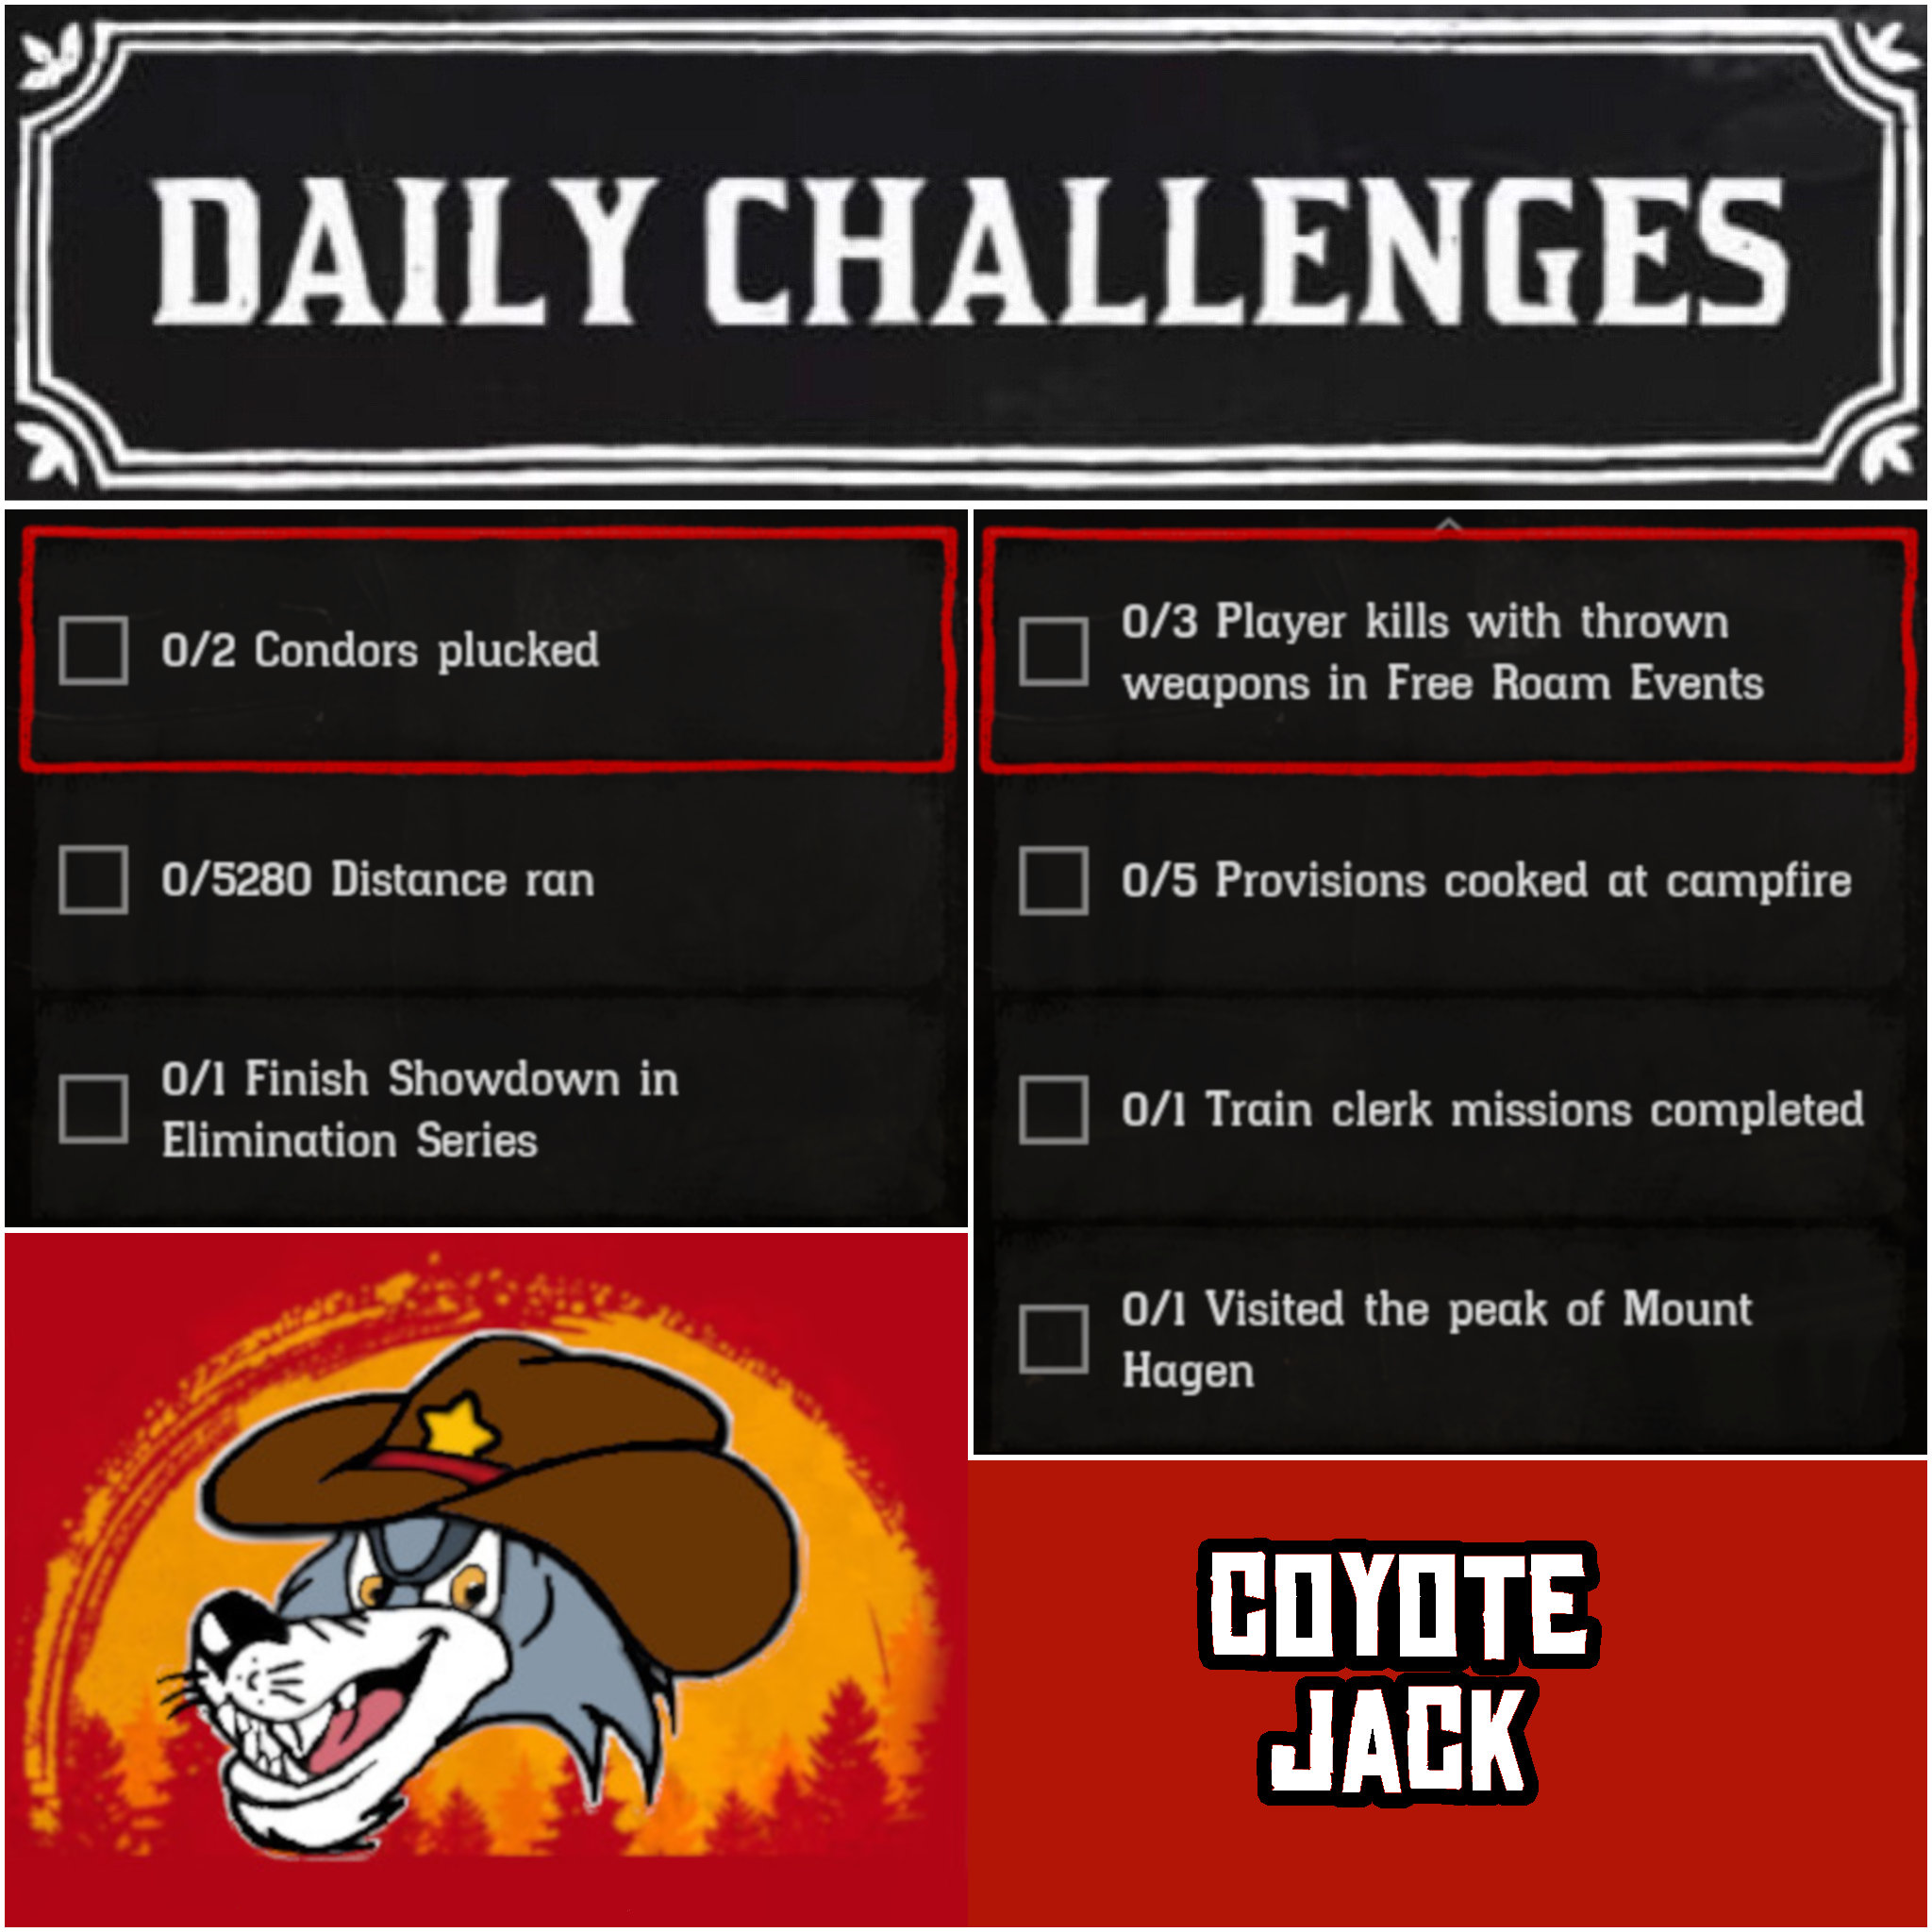 You are currently viewing Wednesday 20 January Daily Challenges